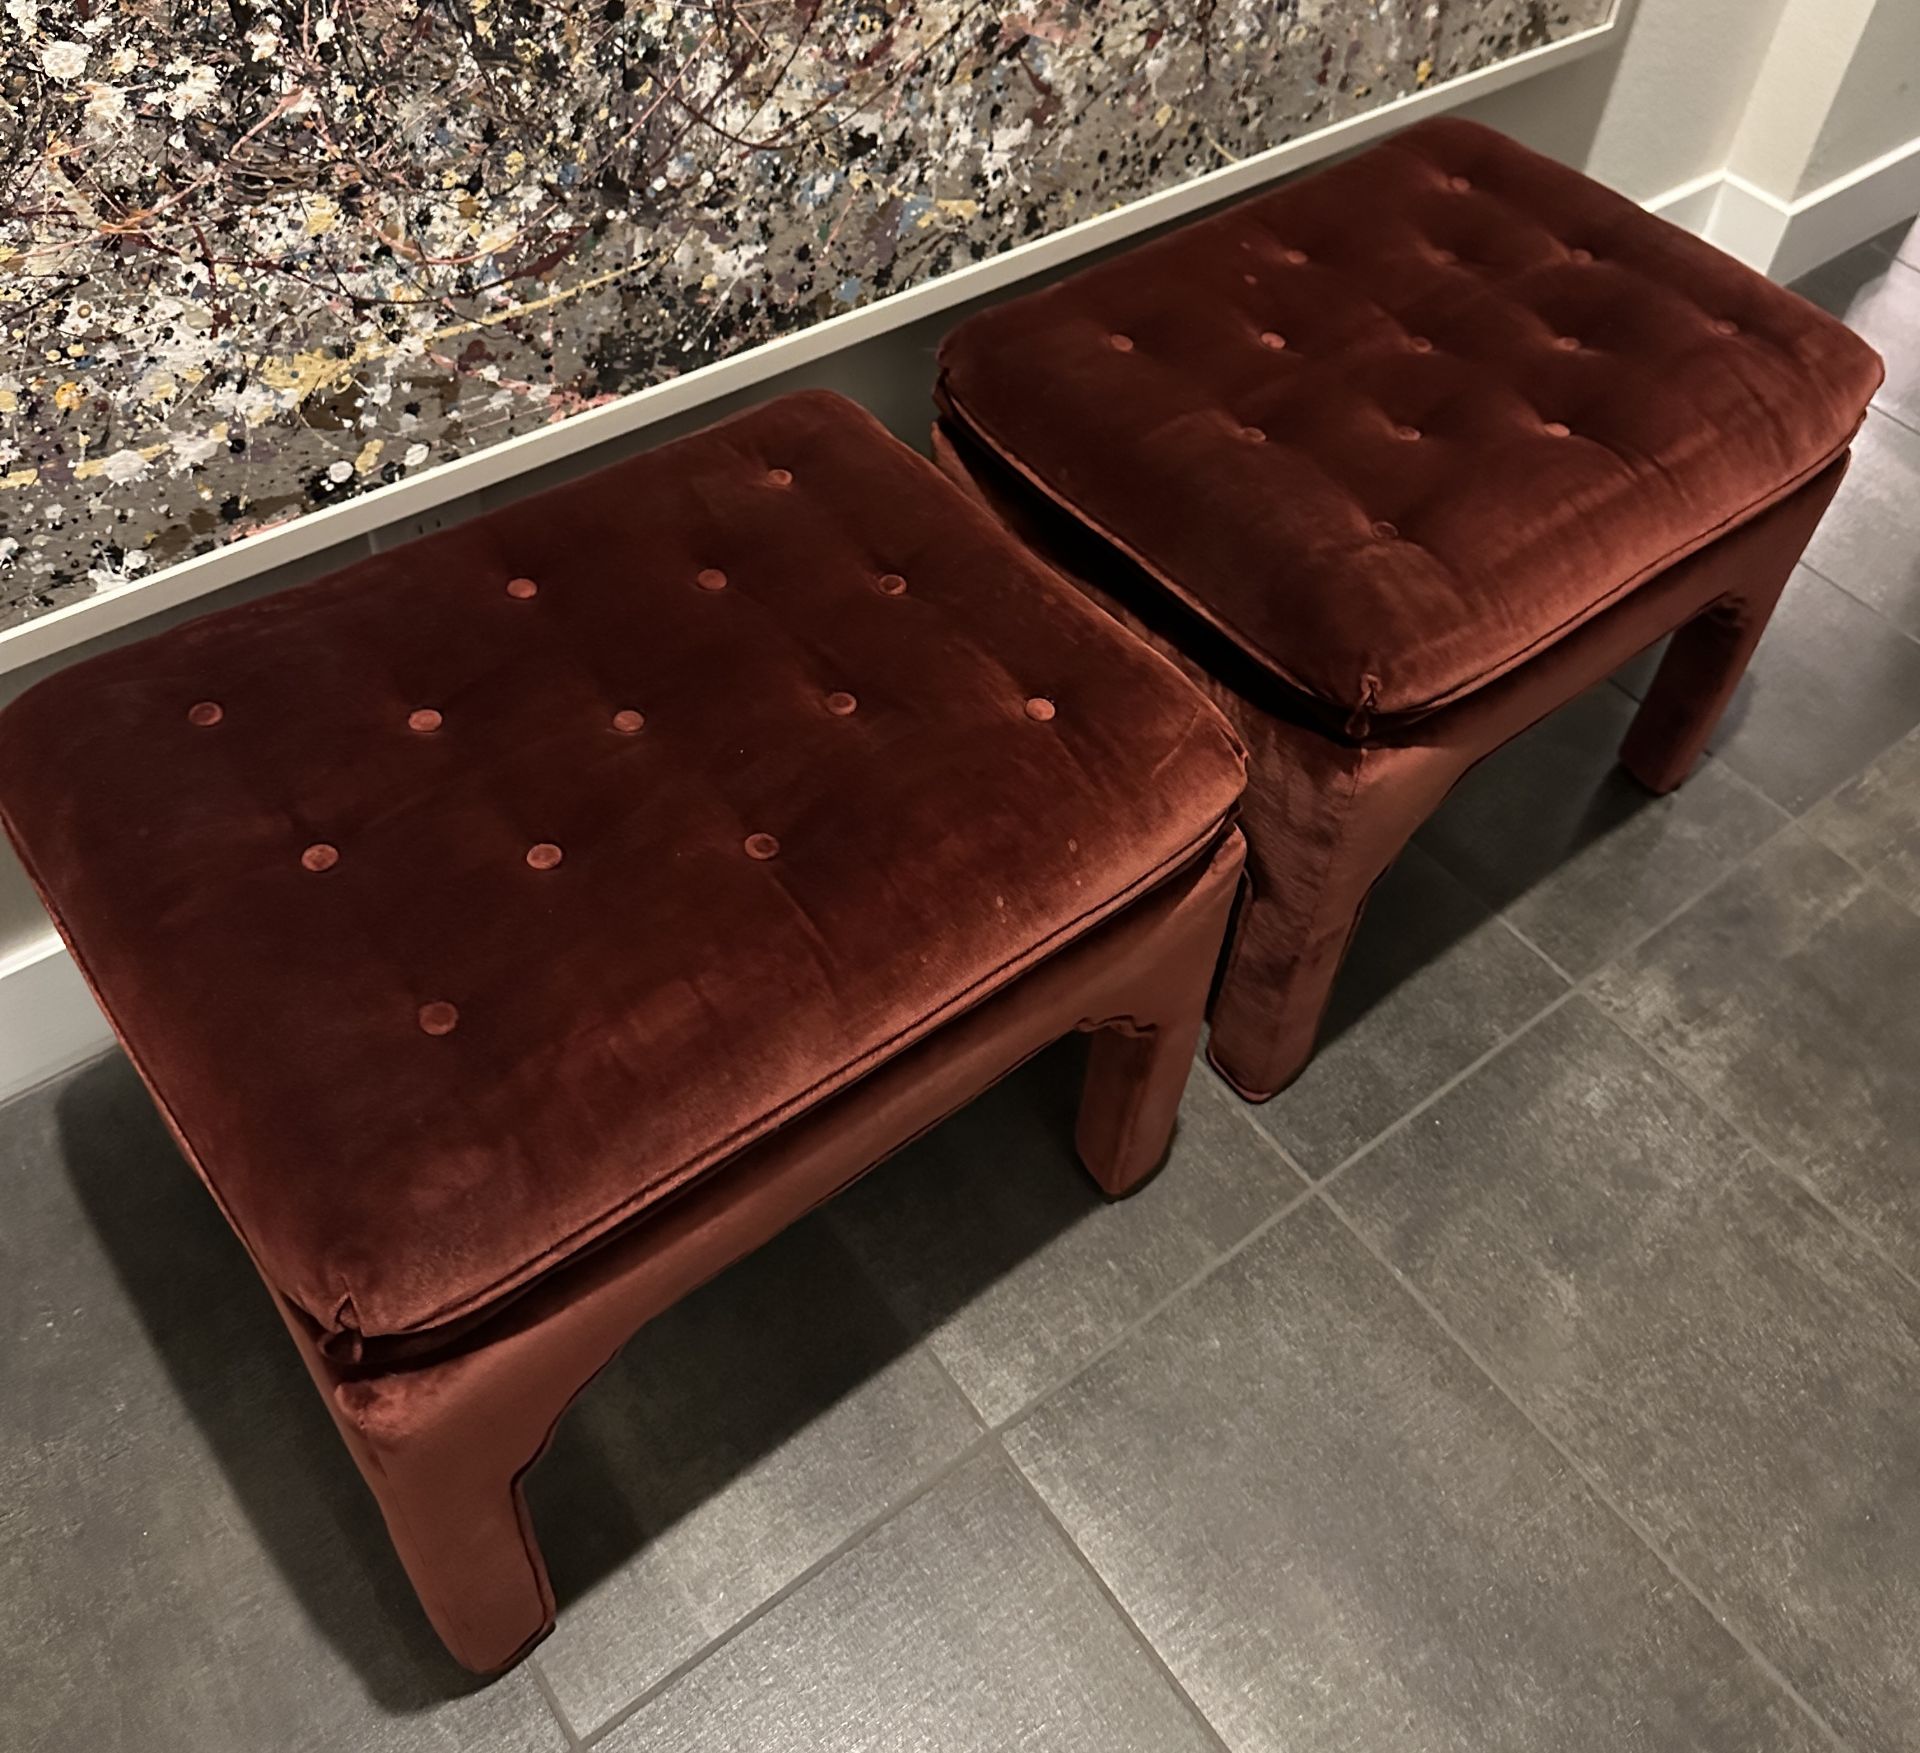 2 DARK RED VELVET END STOOLS, CHAIRS - Image 3 of 3